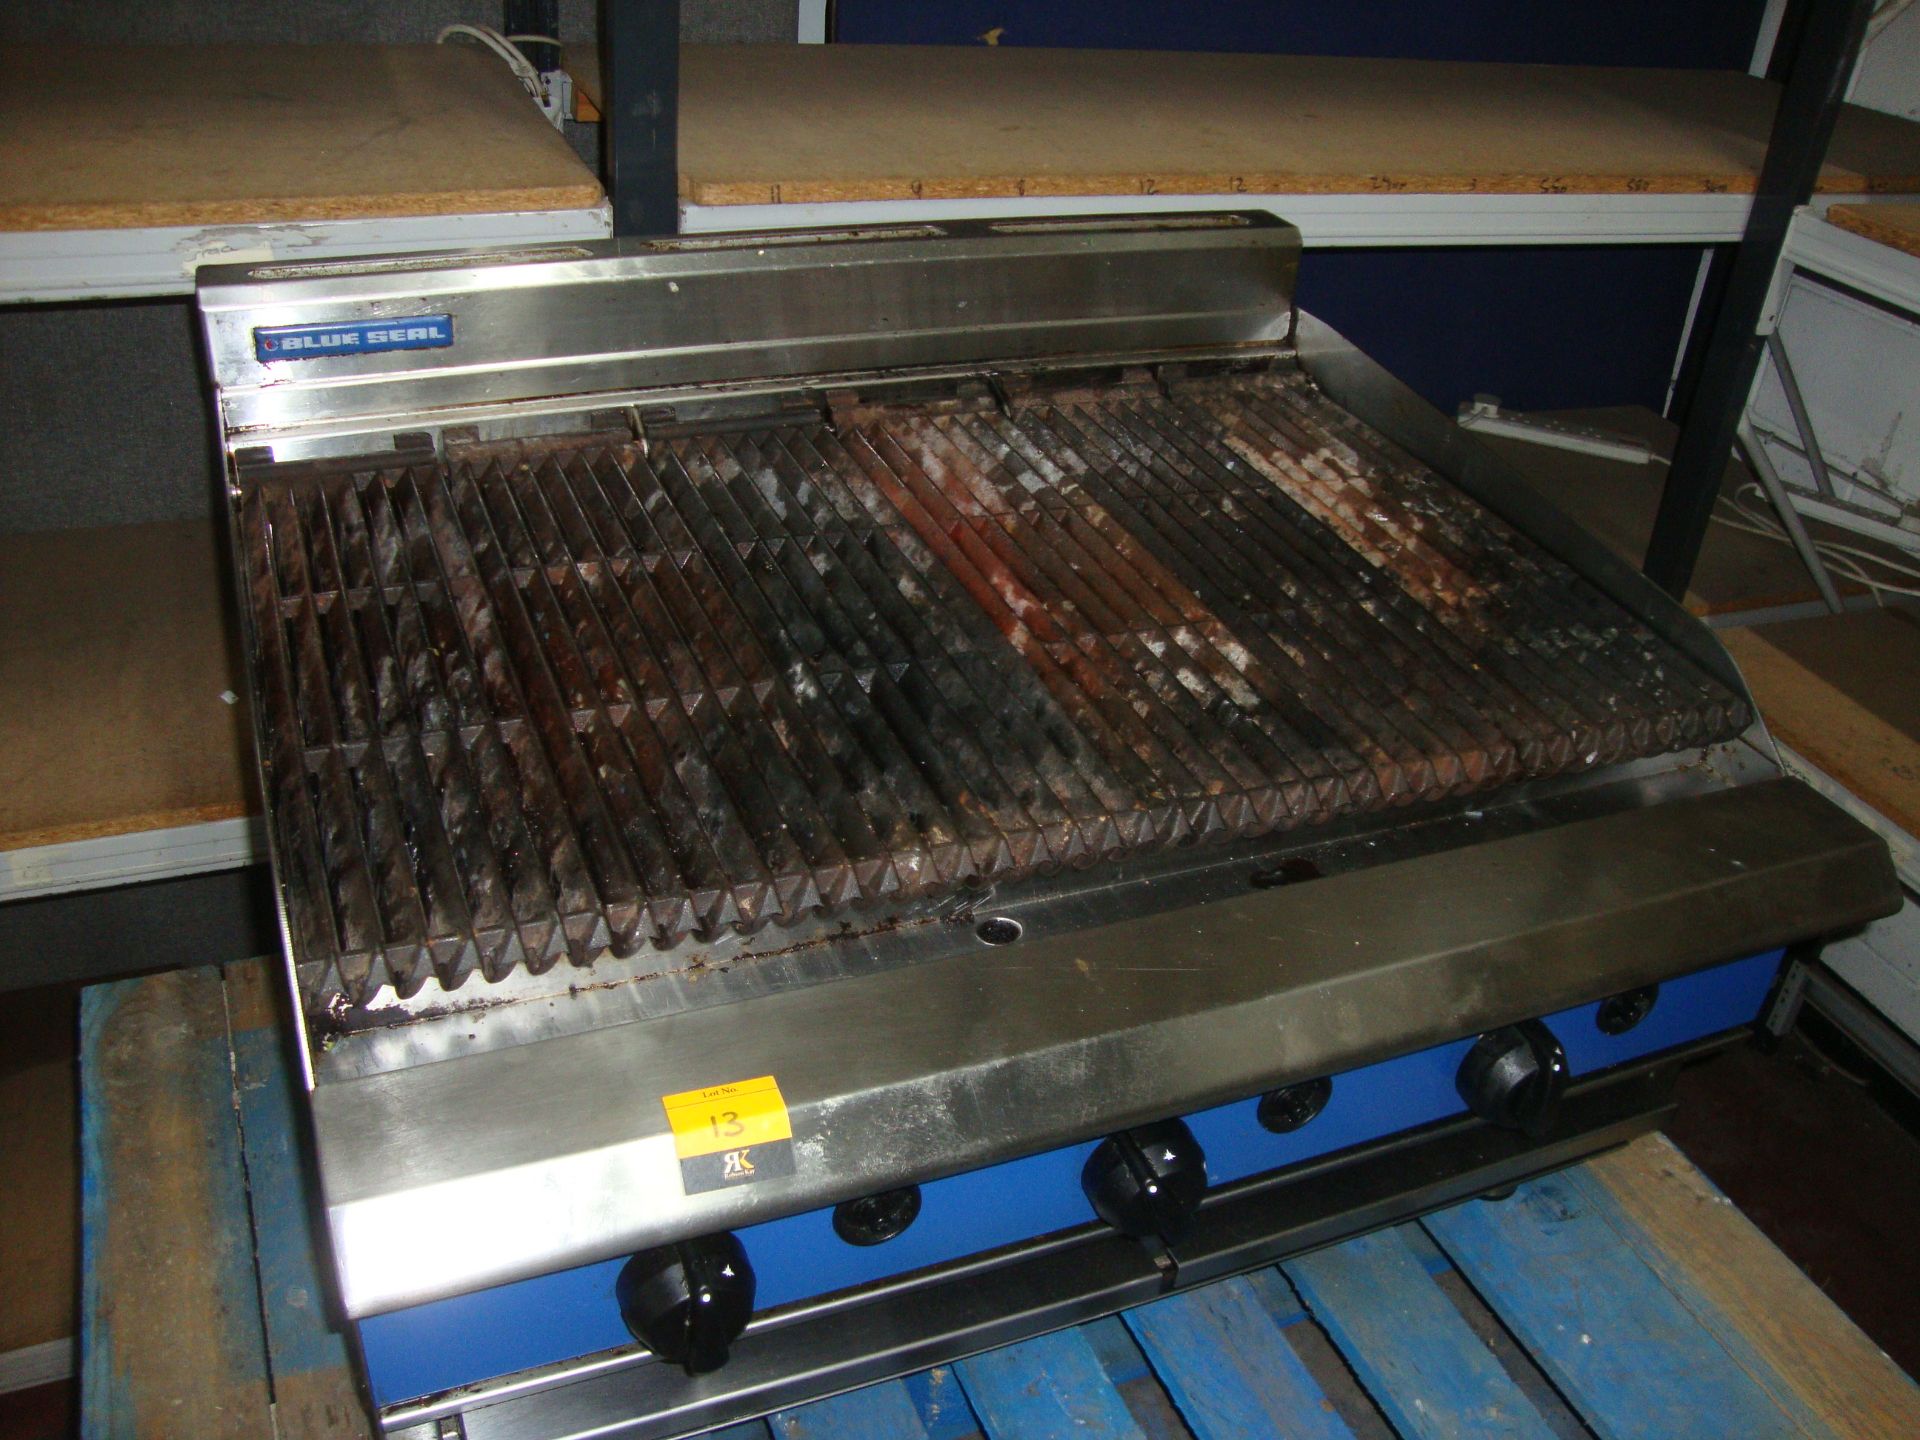 Blue Seal G596-B char grill - Image 8 of 10